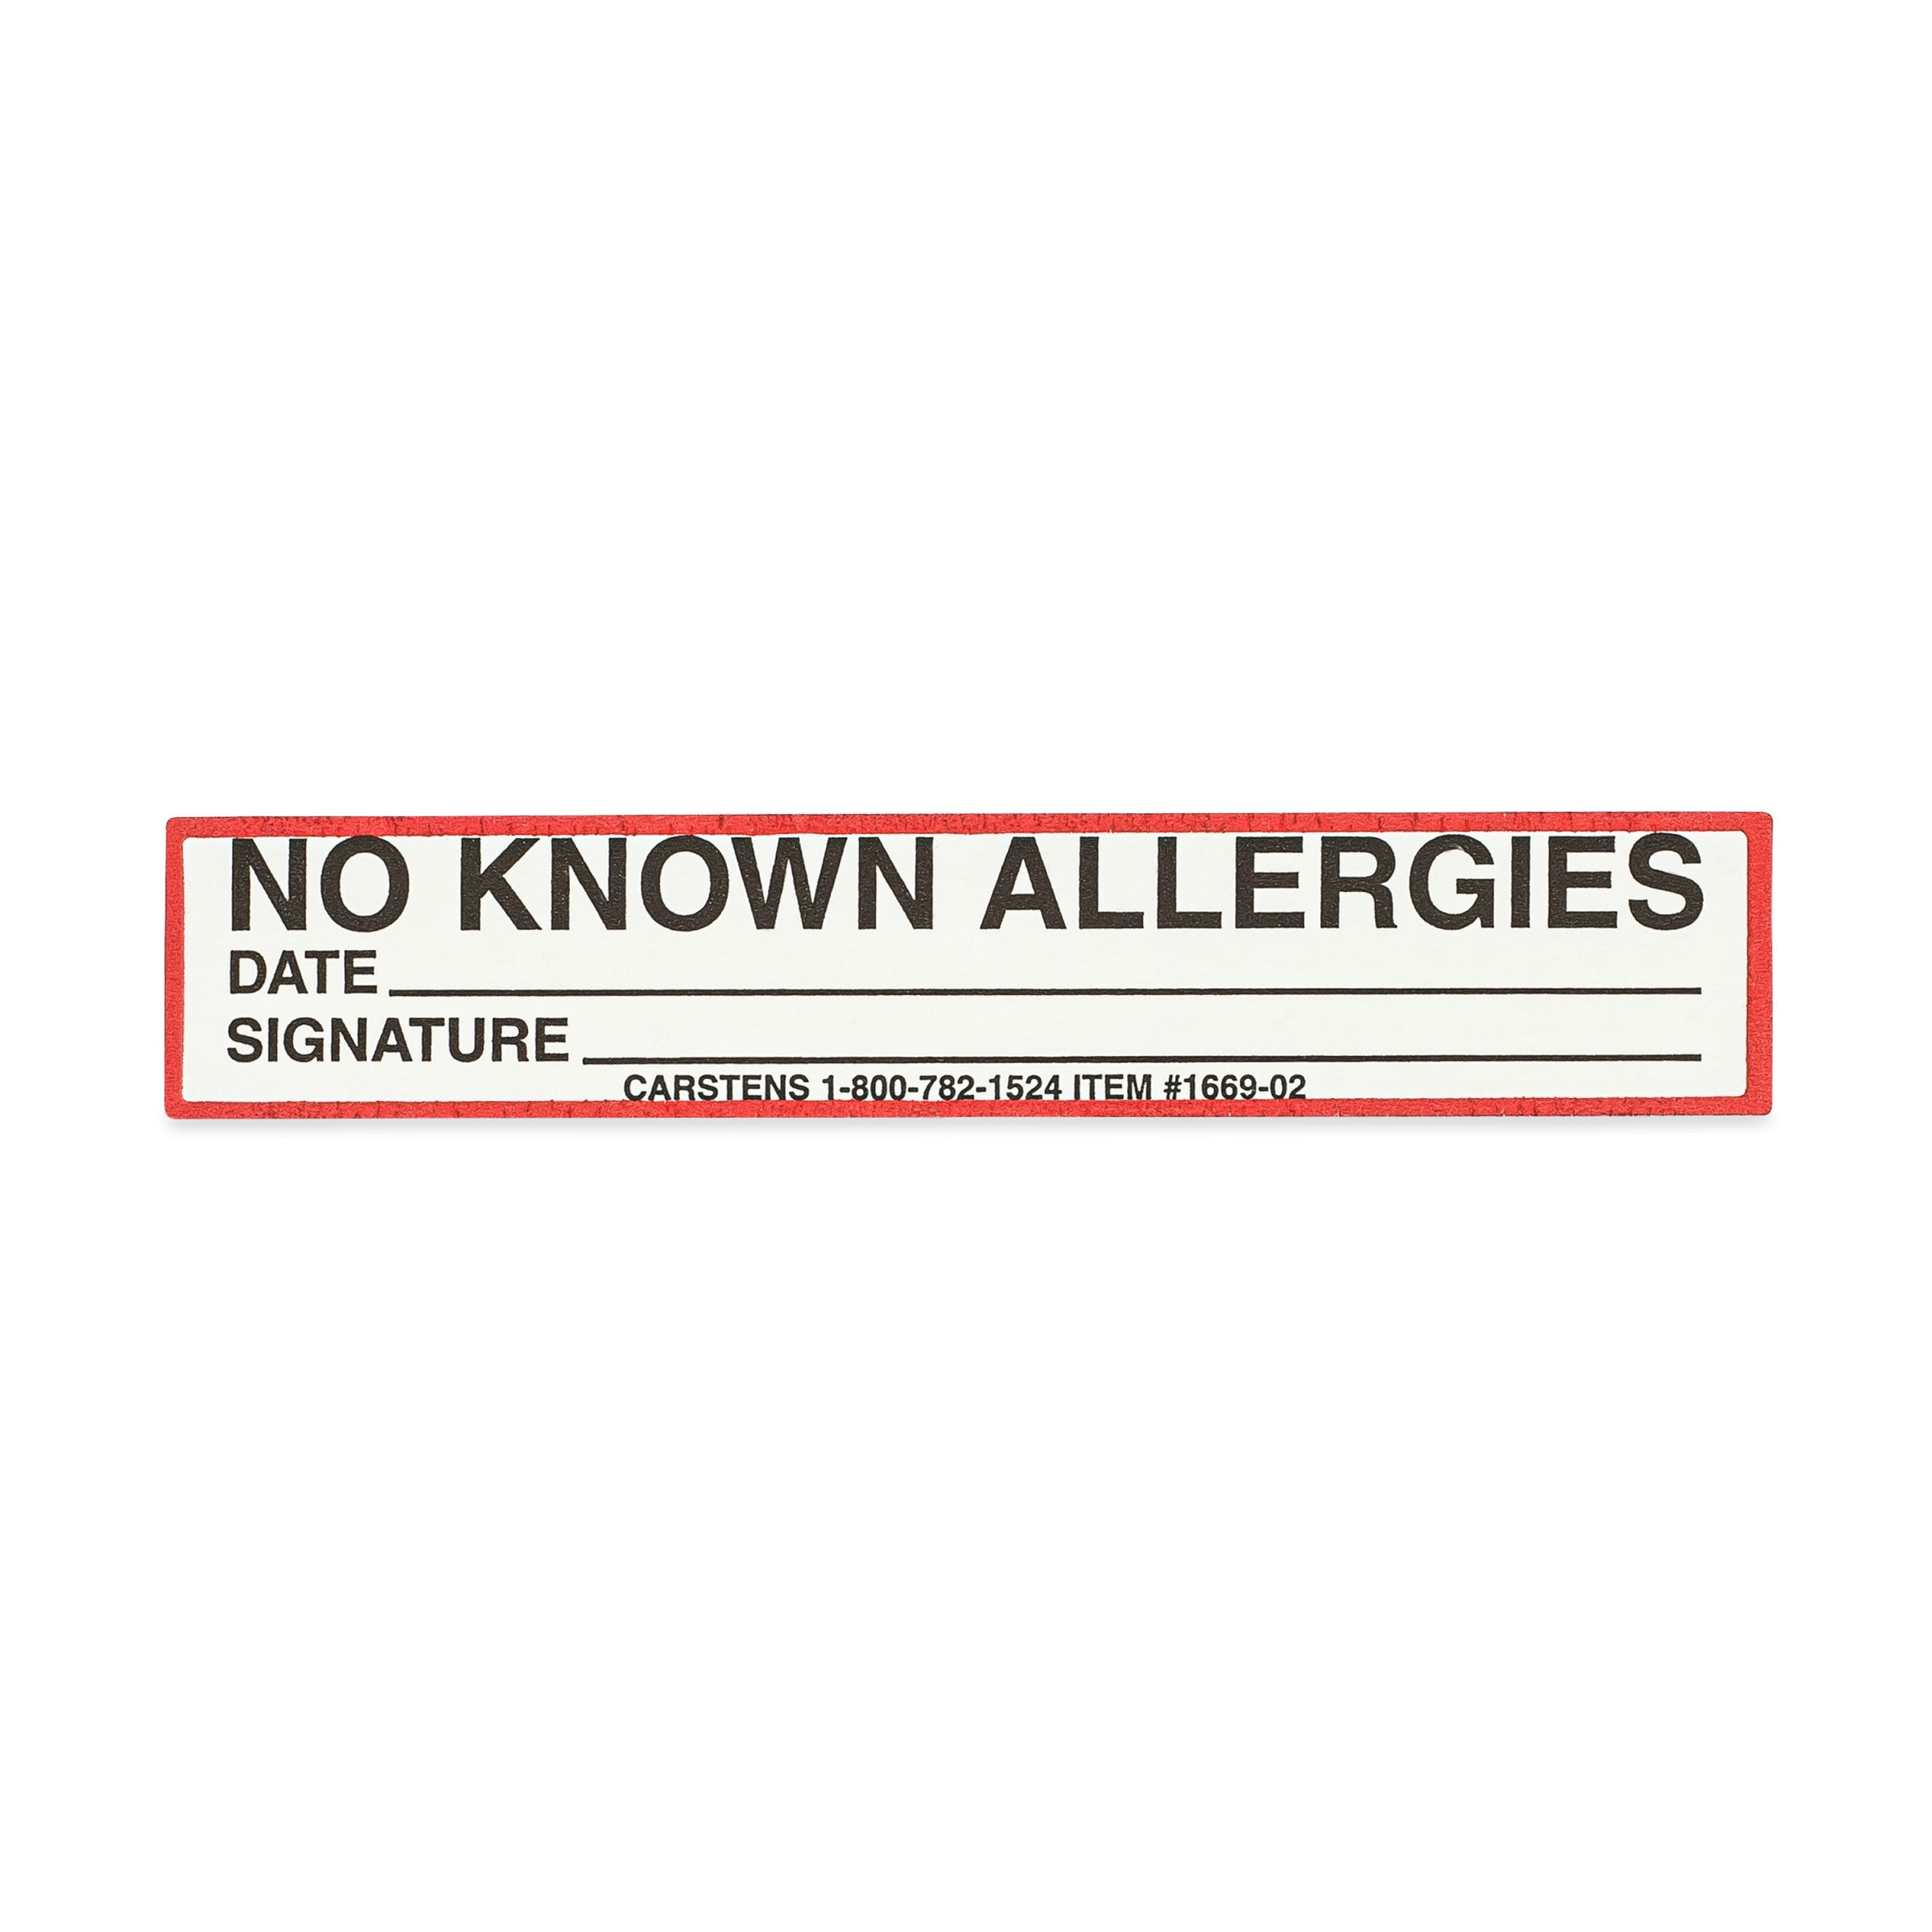 No Known Allergies Alert/Instruction Card, White, W5.25" x H1" (100 pack)